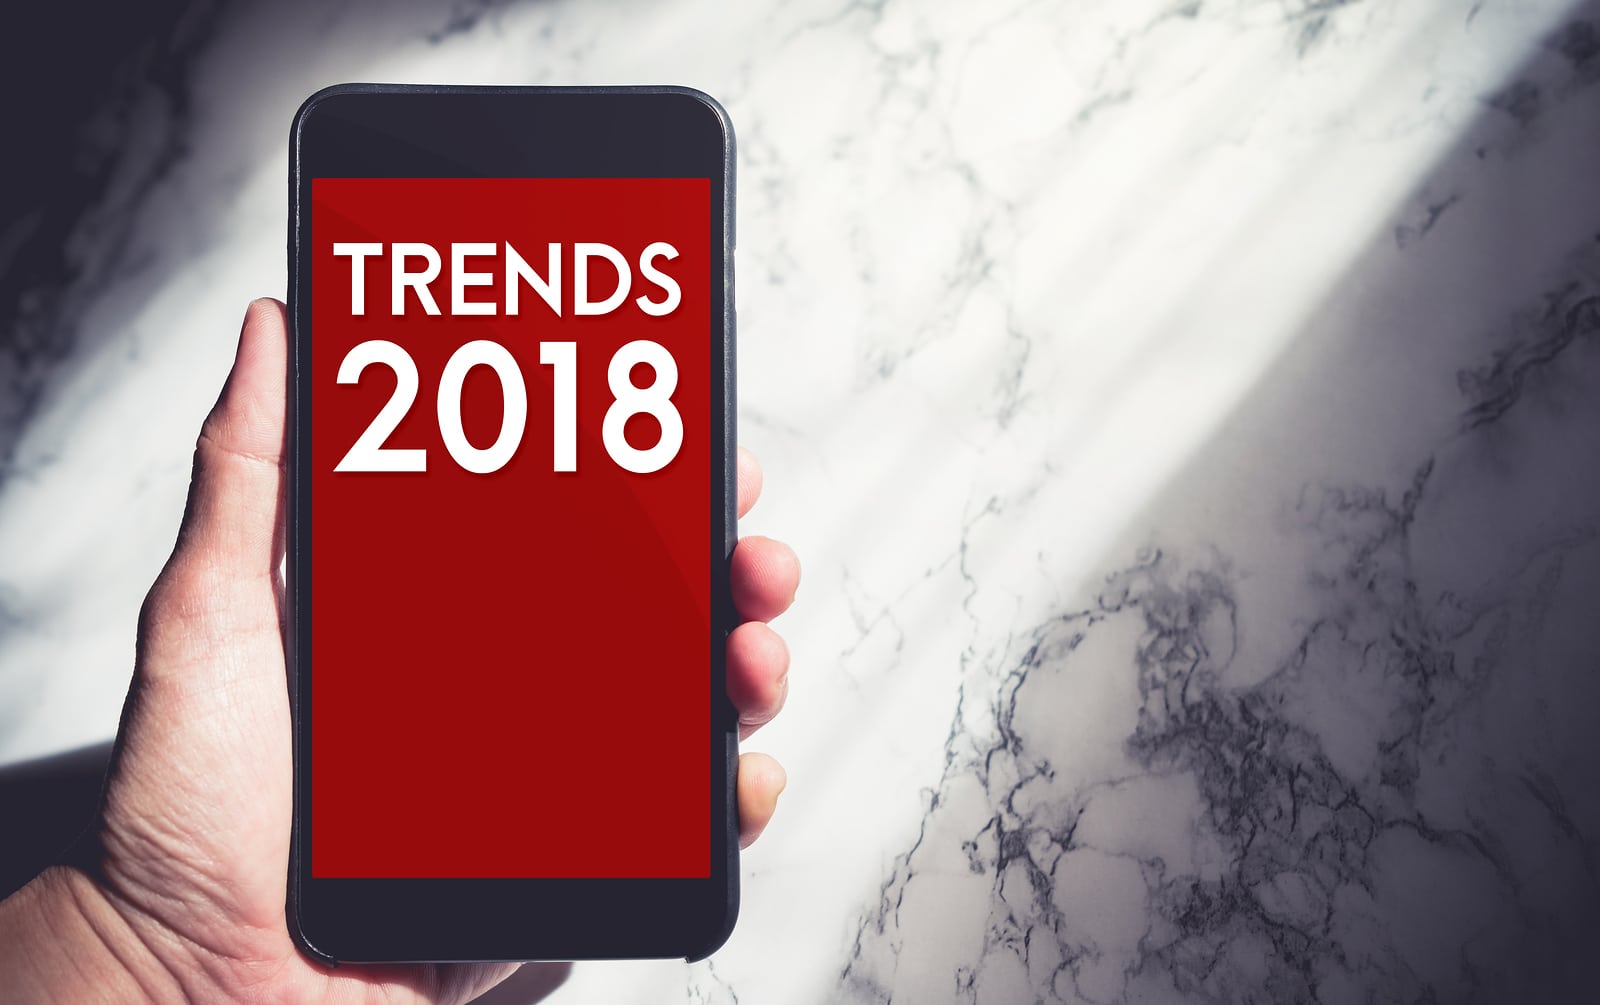 Mobile commerce trends in 2018: Is your brand ready?